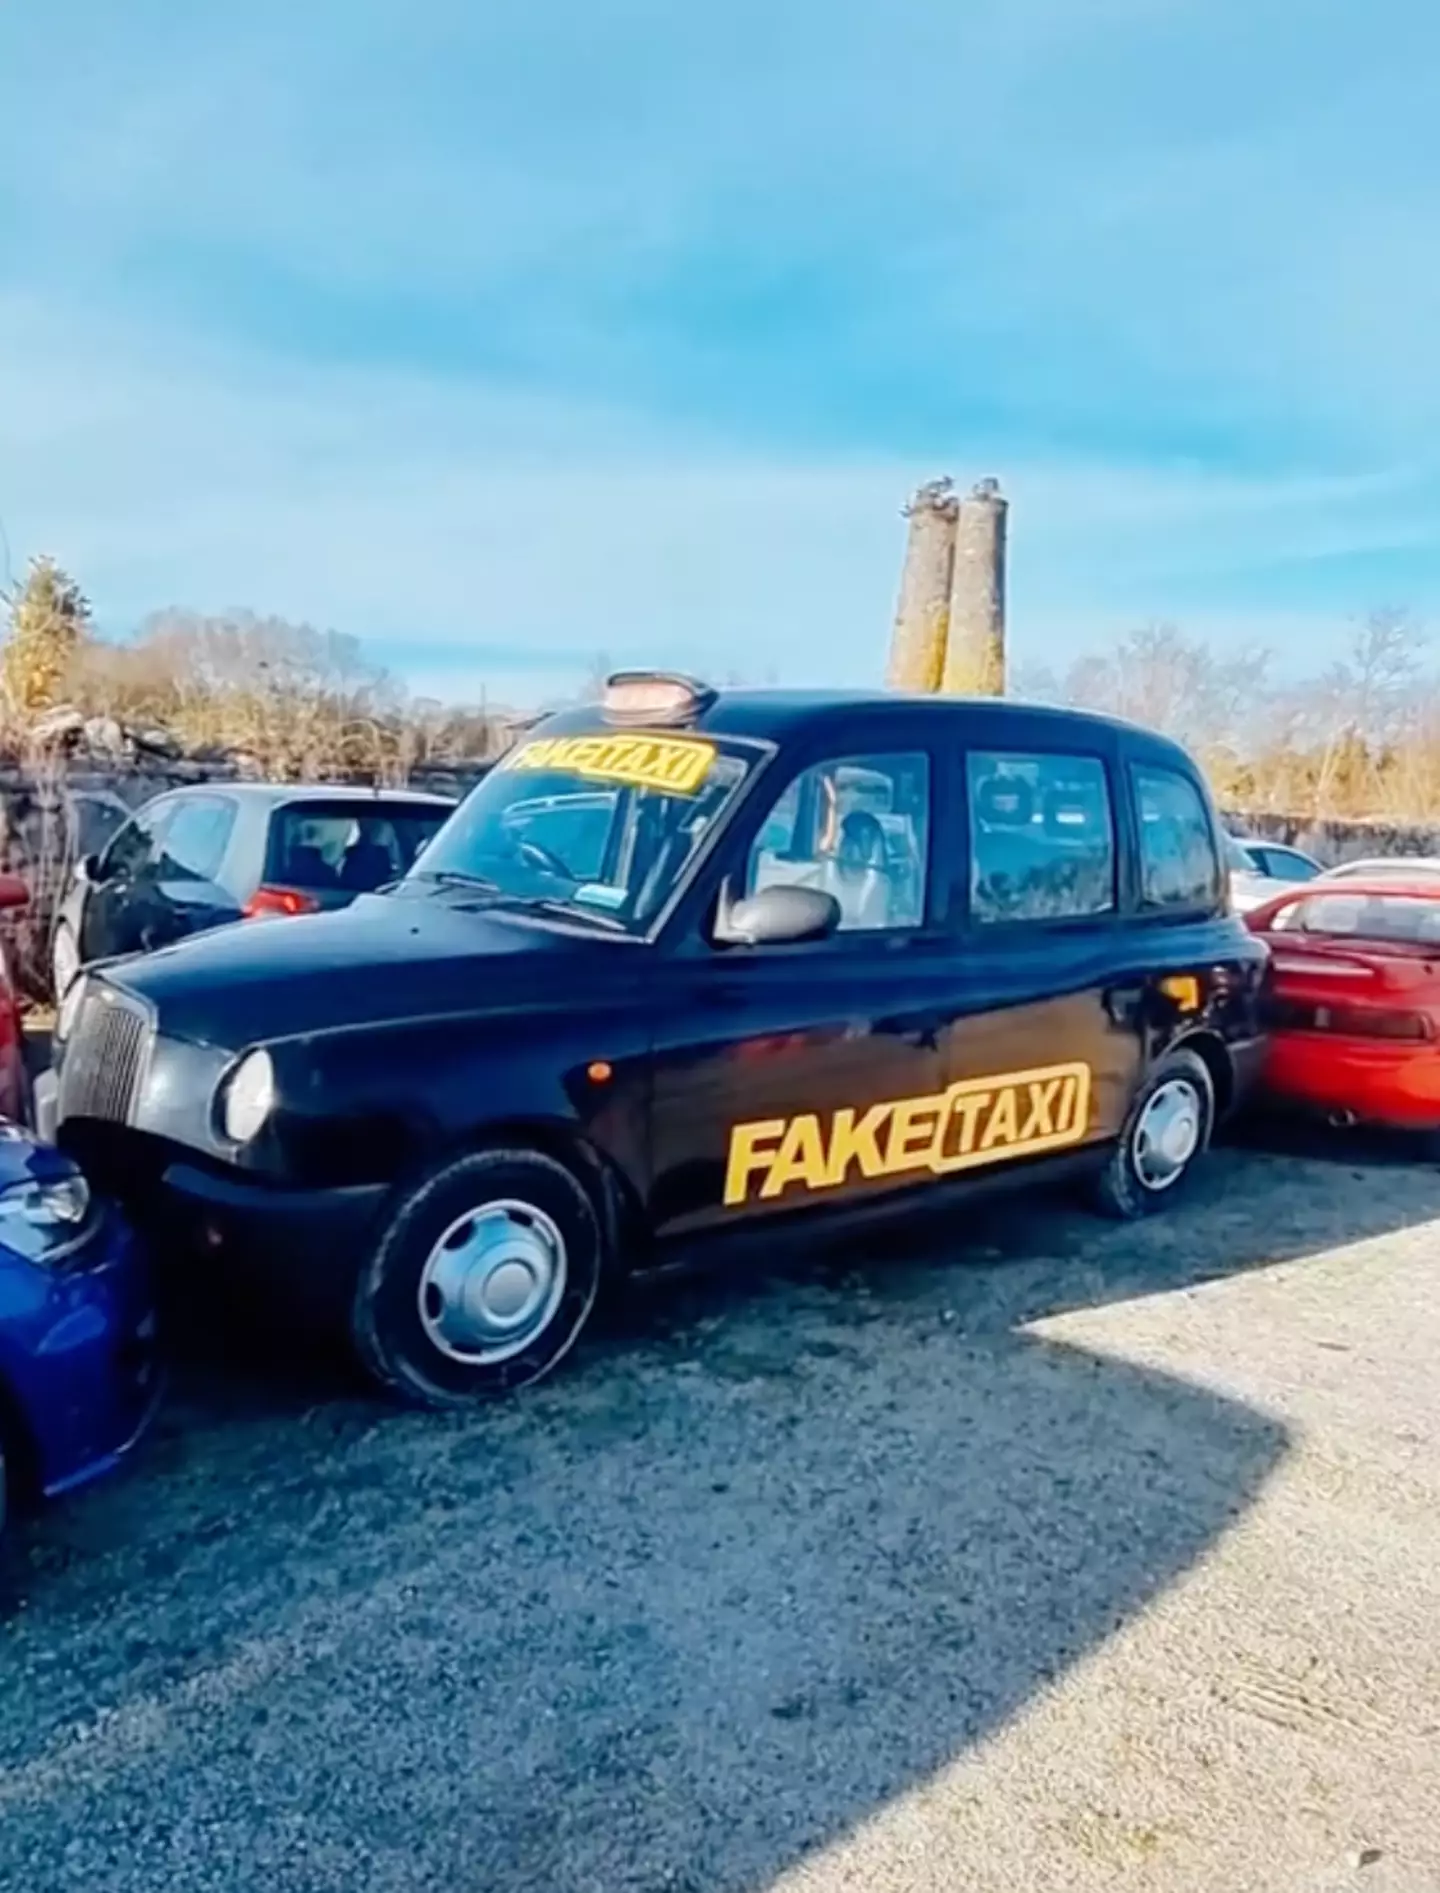 There it is, the Fake Taxi.